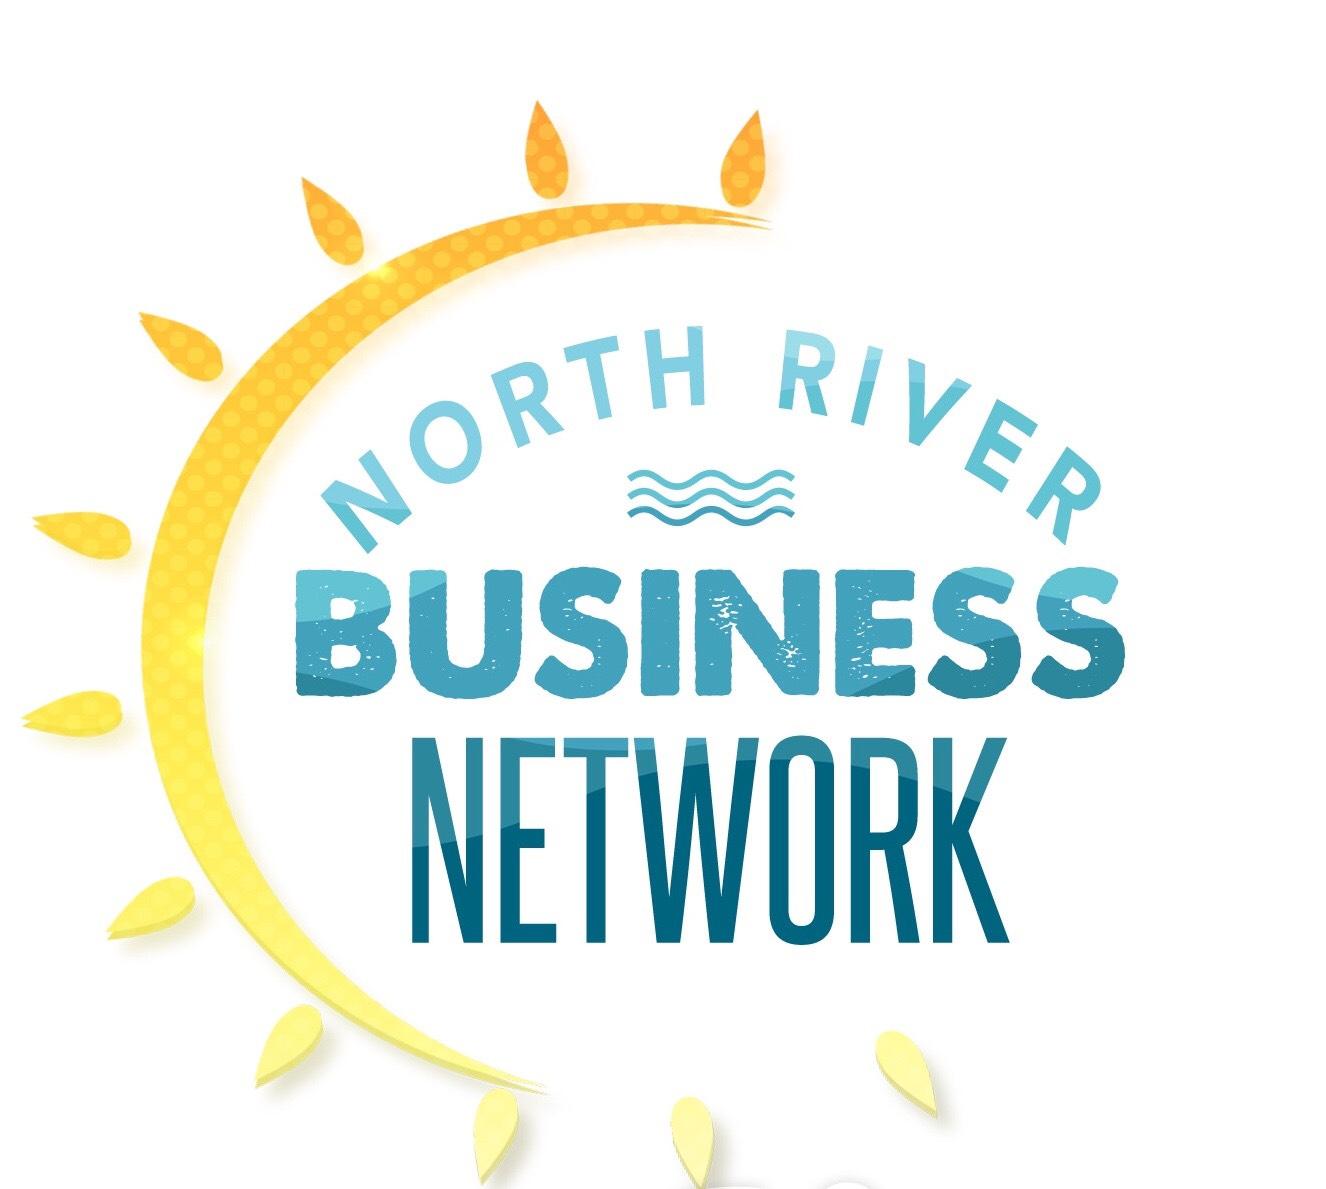 Milford, Mini-Golf Tournament sponsored by the North River Business Network